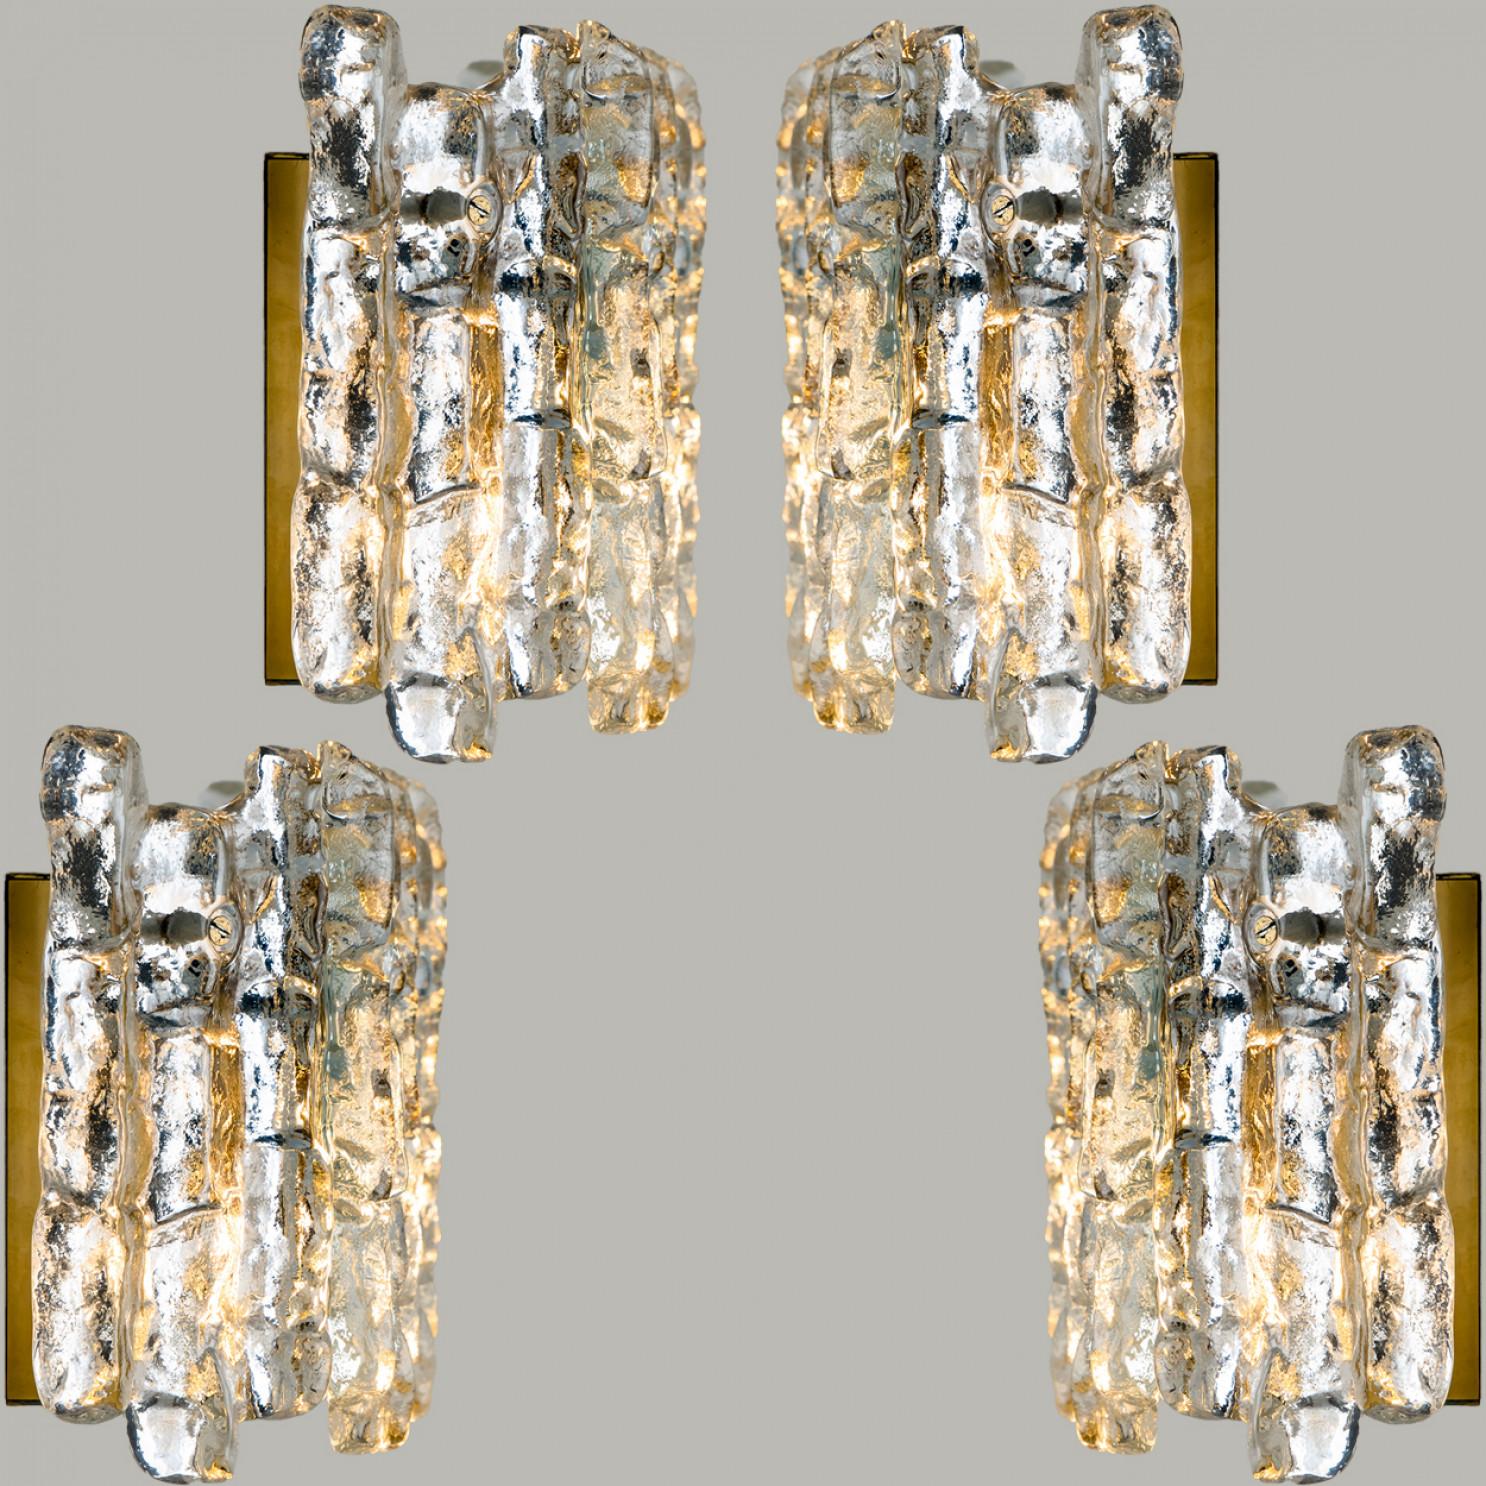 1 of the 3 Pairs of Large Kalmar Wall Sconces by J.T. Kalmar, Austria, 1970s For Sale 8